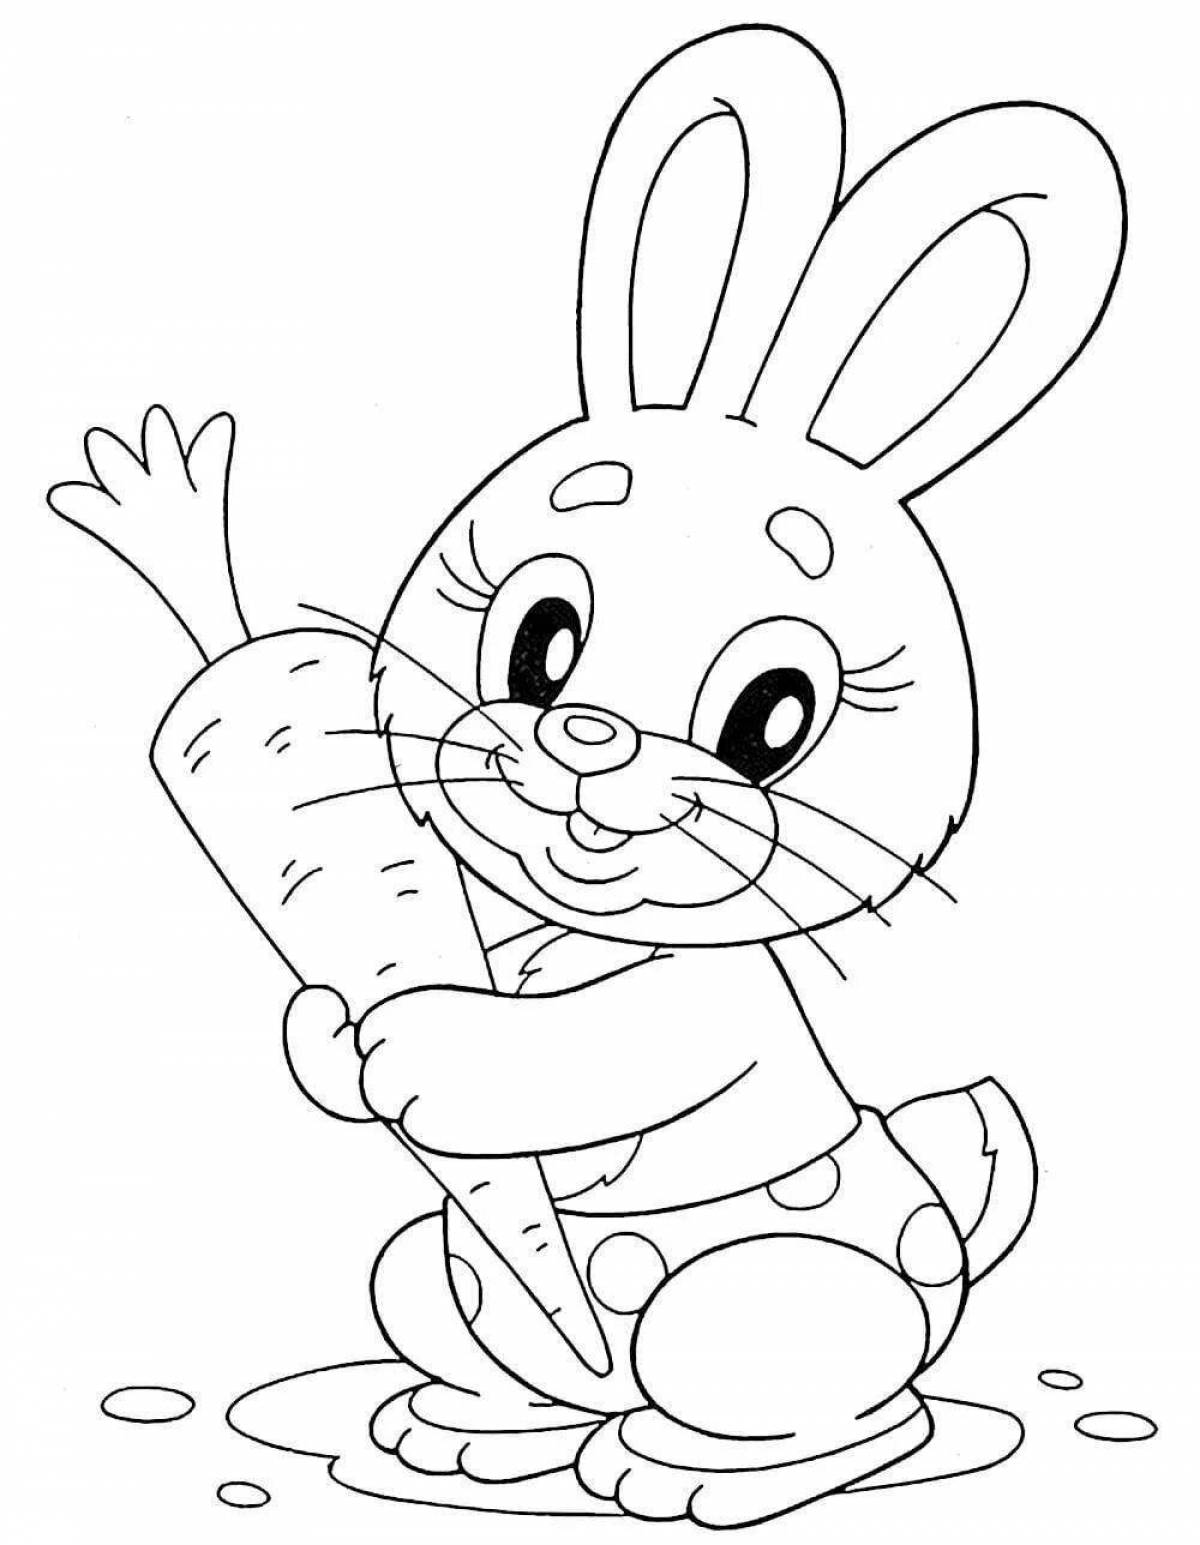 Spicy bunny coloring book for 2-3 year olds